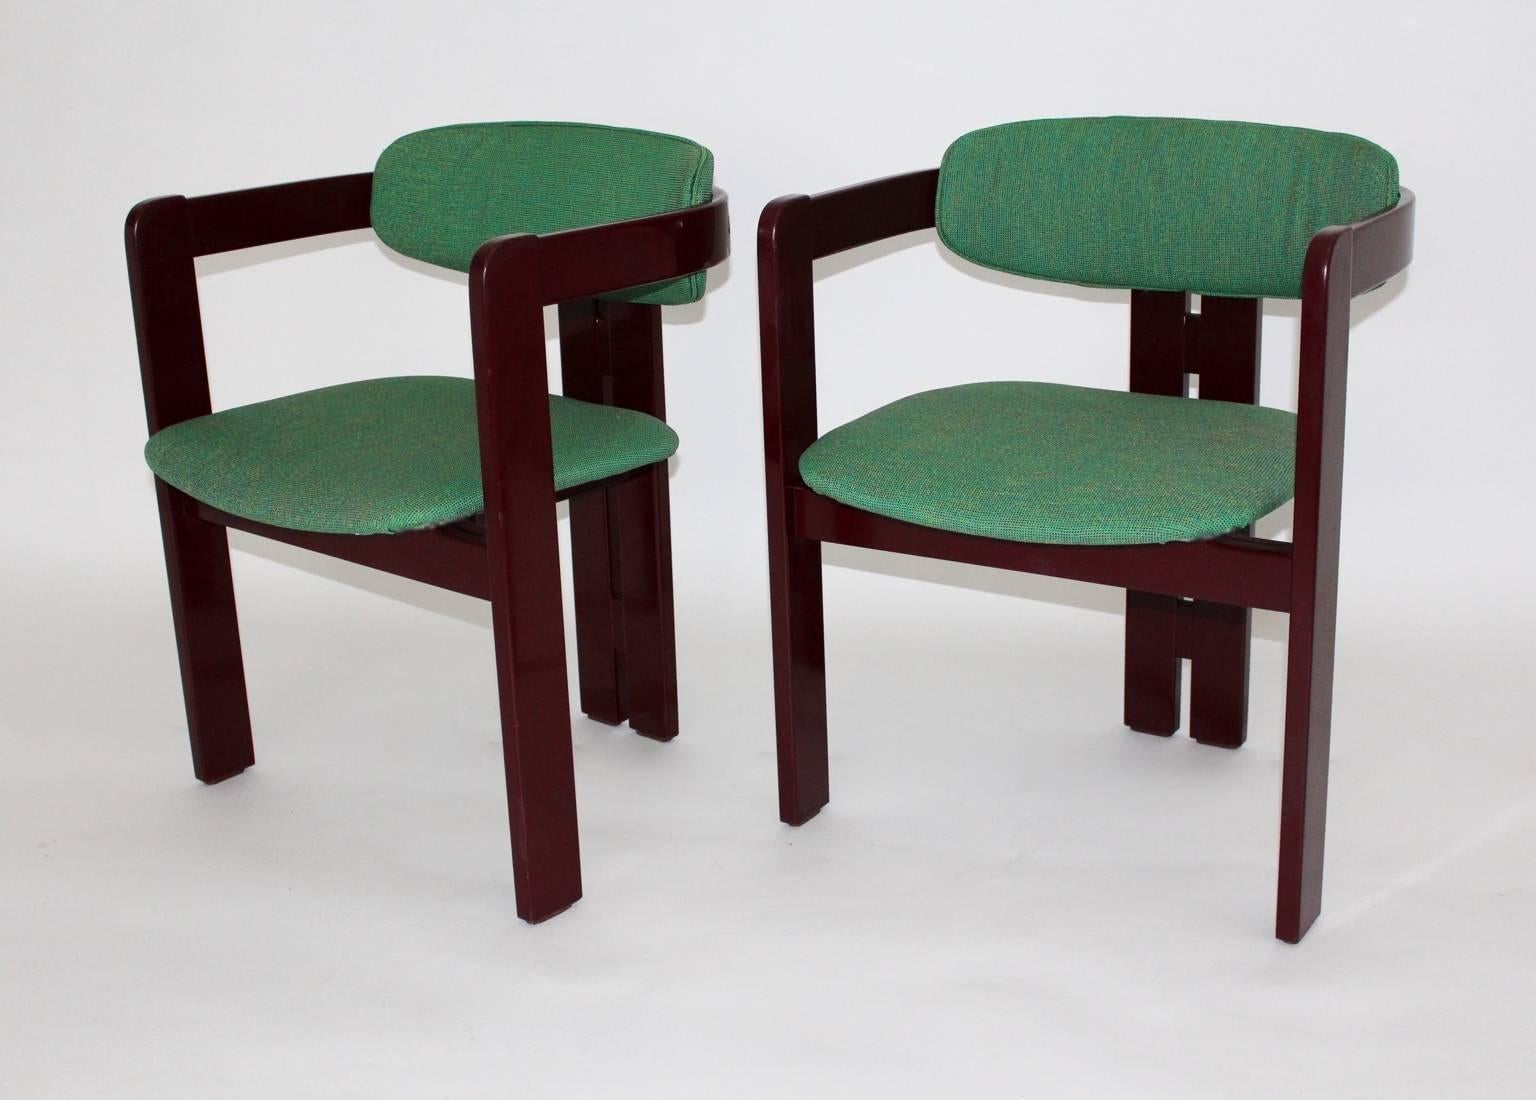 An Italian vintage set of two red lacquered beech dining chairs from the 1970s.
The beechwood frame is red brown lacquered and shows minor signs of age, while the seat and back are new covered with green speckled textile fabric.
So the overall